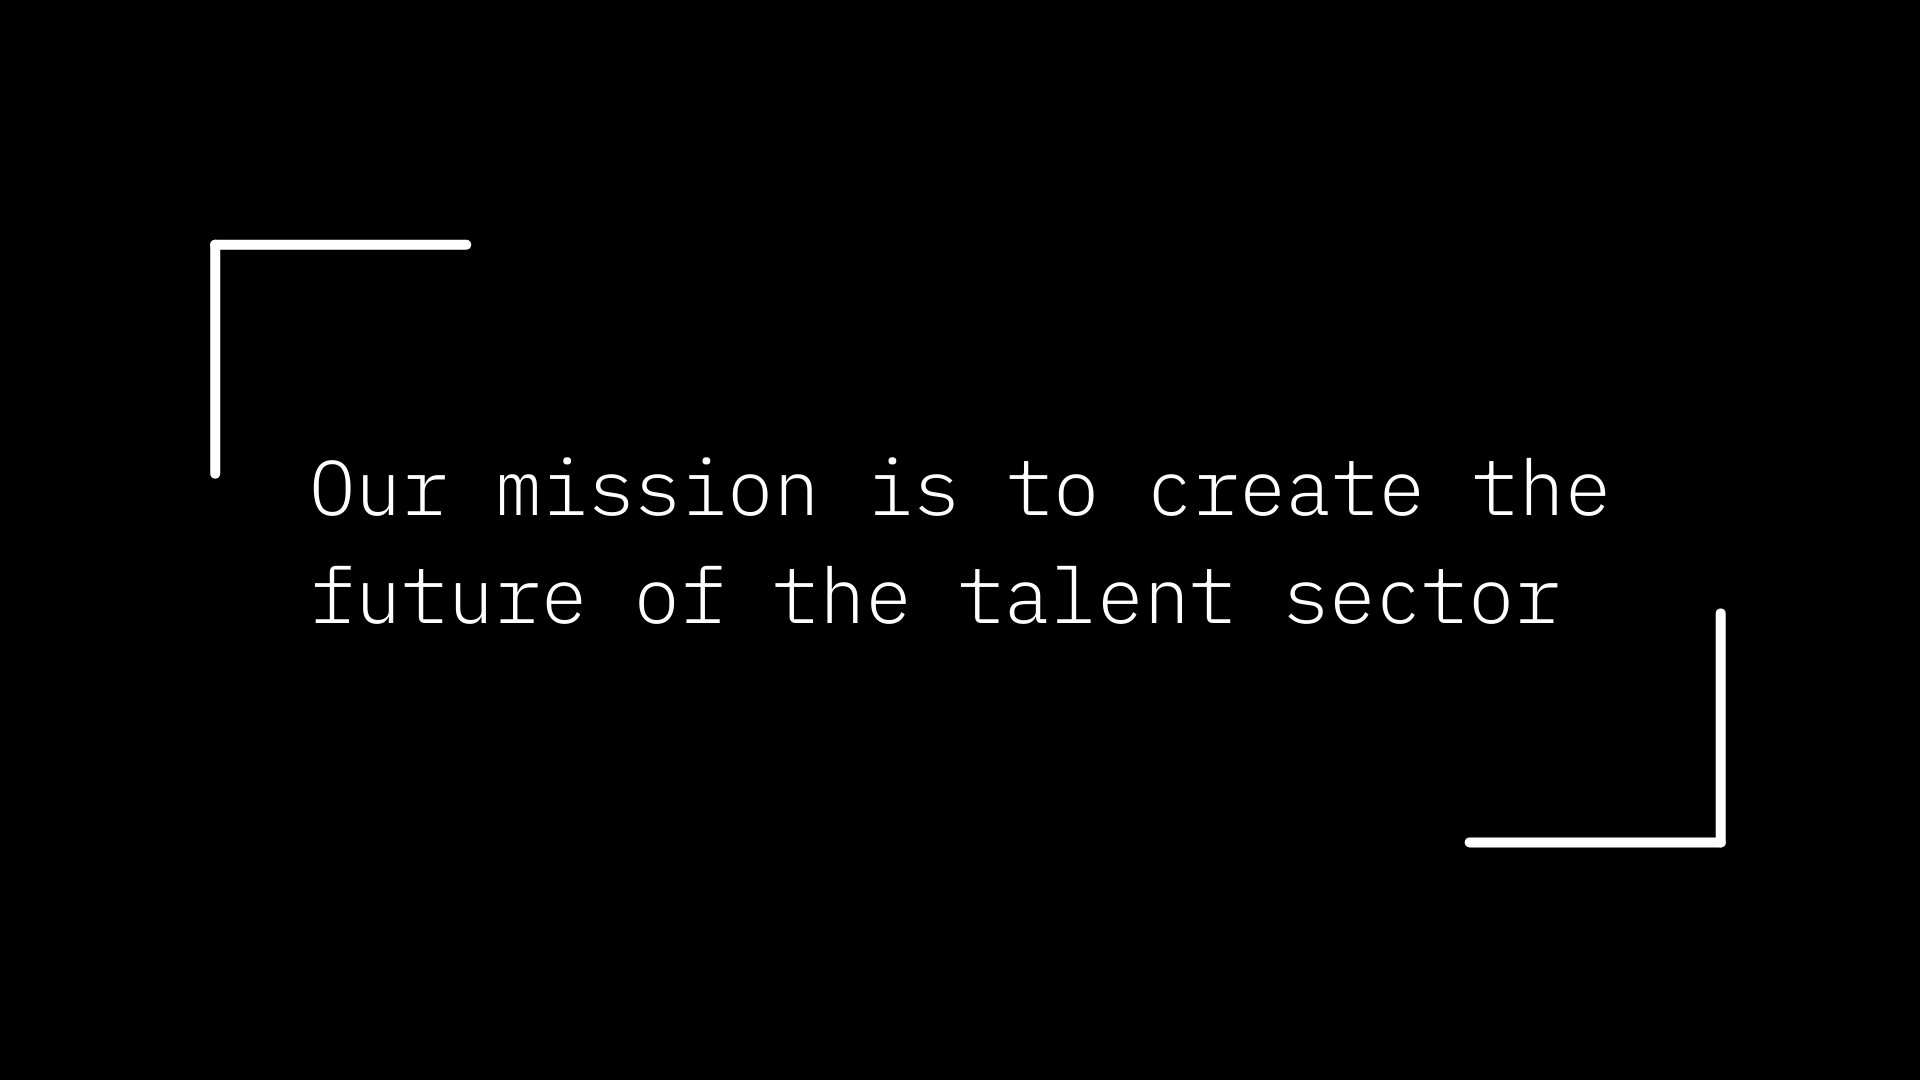 Francis & Francis: Our mission is to create the future of the talent sector